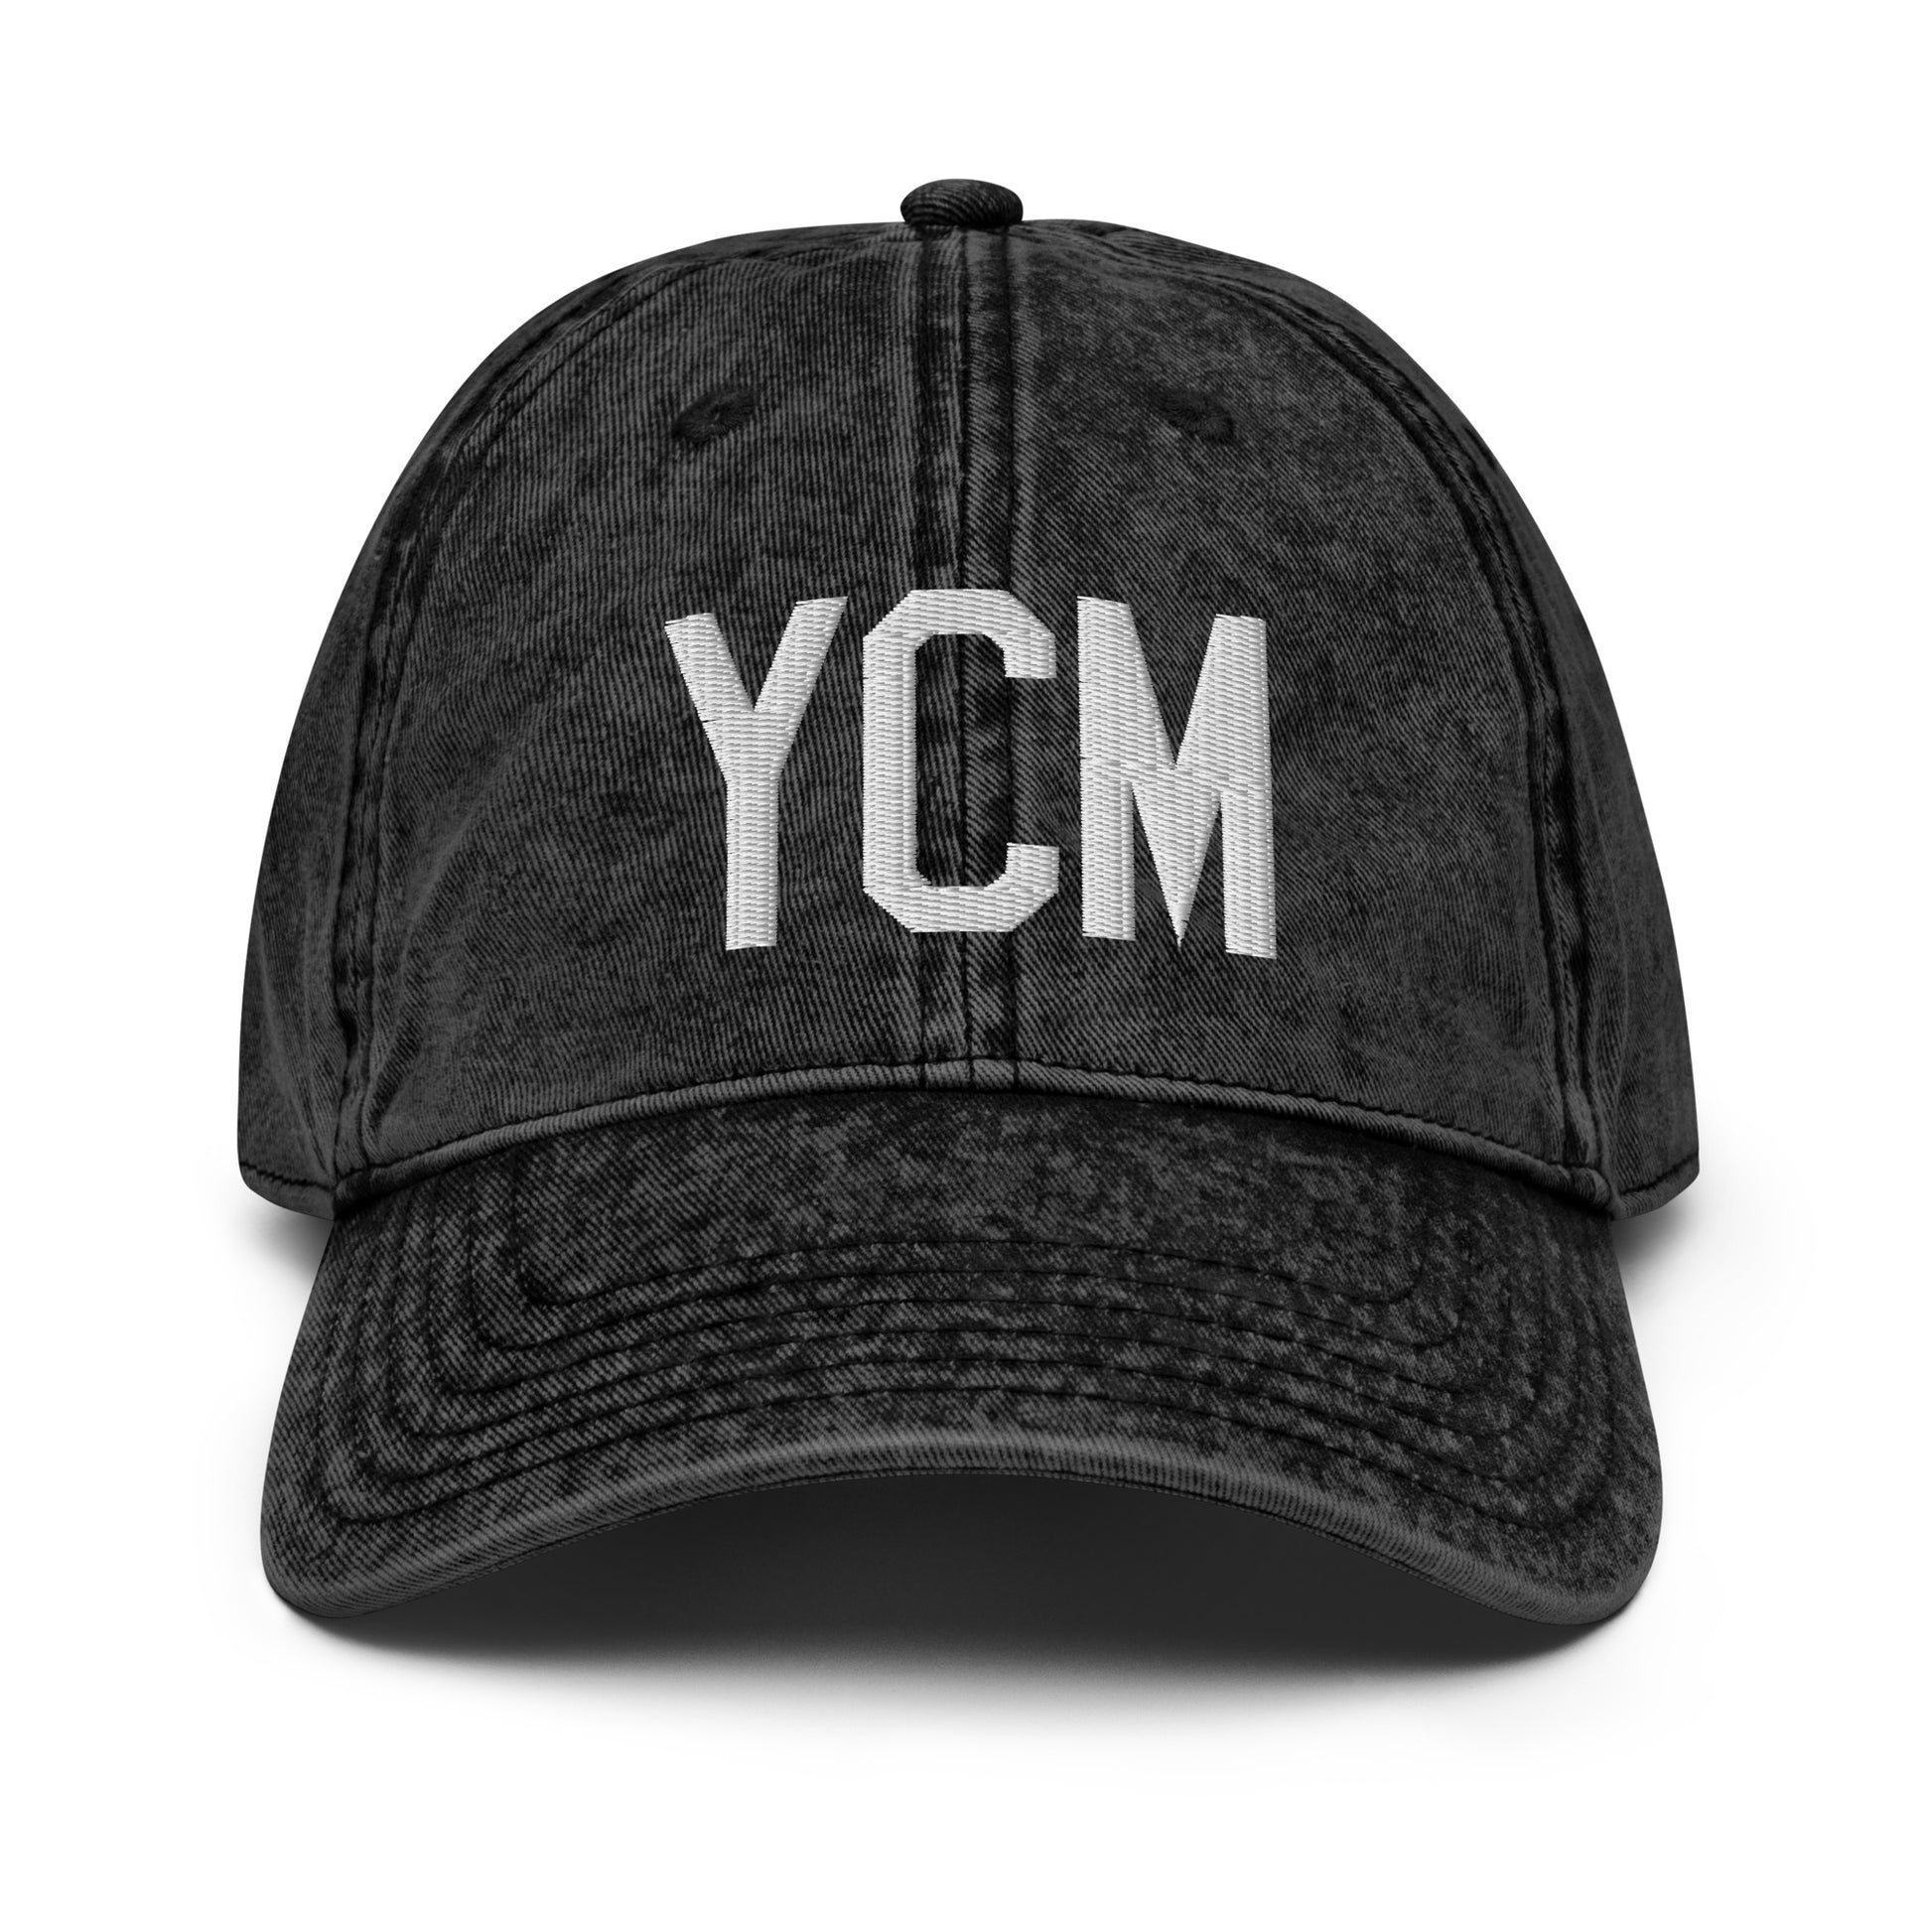 Airport Code Twill Cap - White • YCM St. Catharines • YHM Designs - Image 14